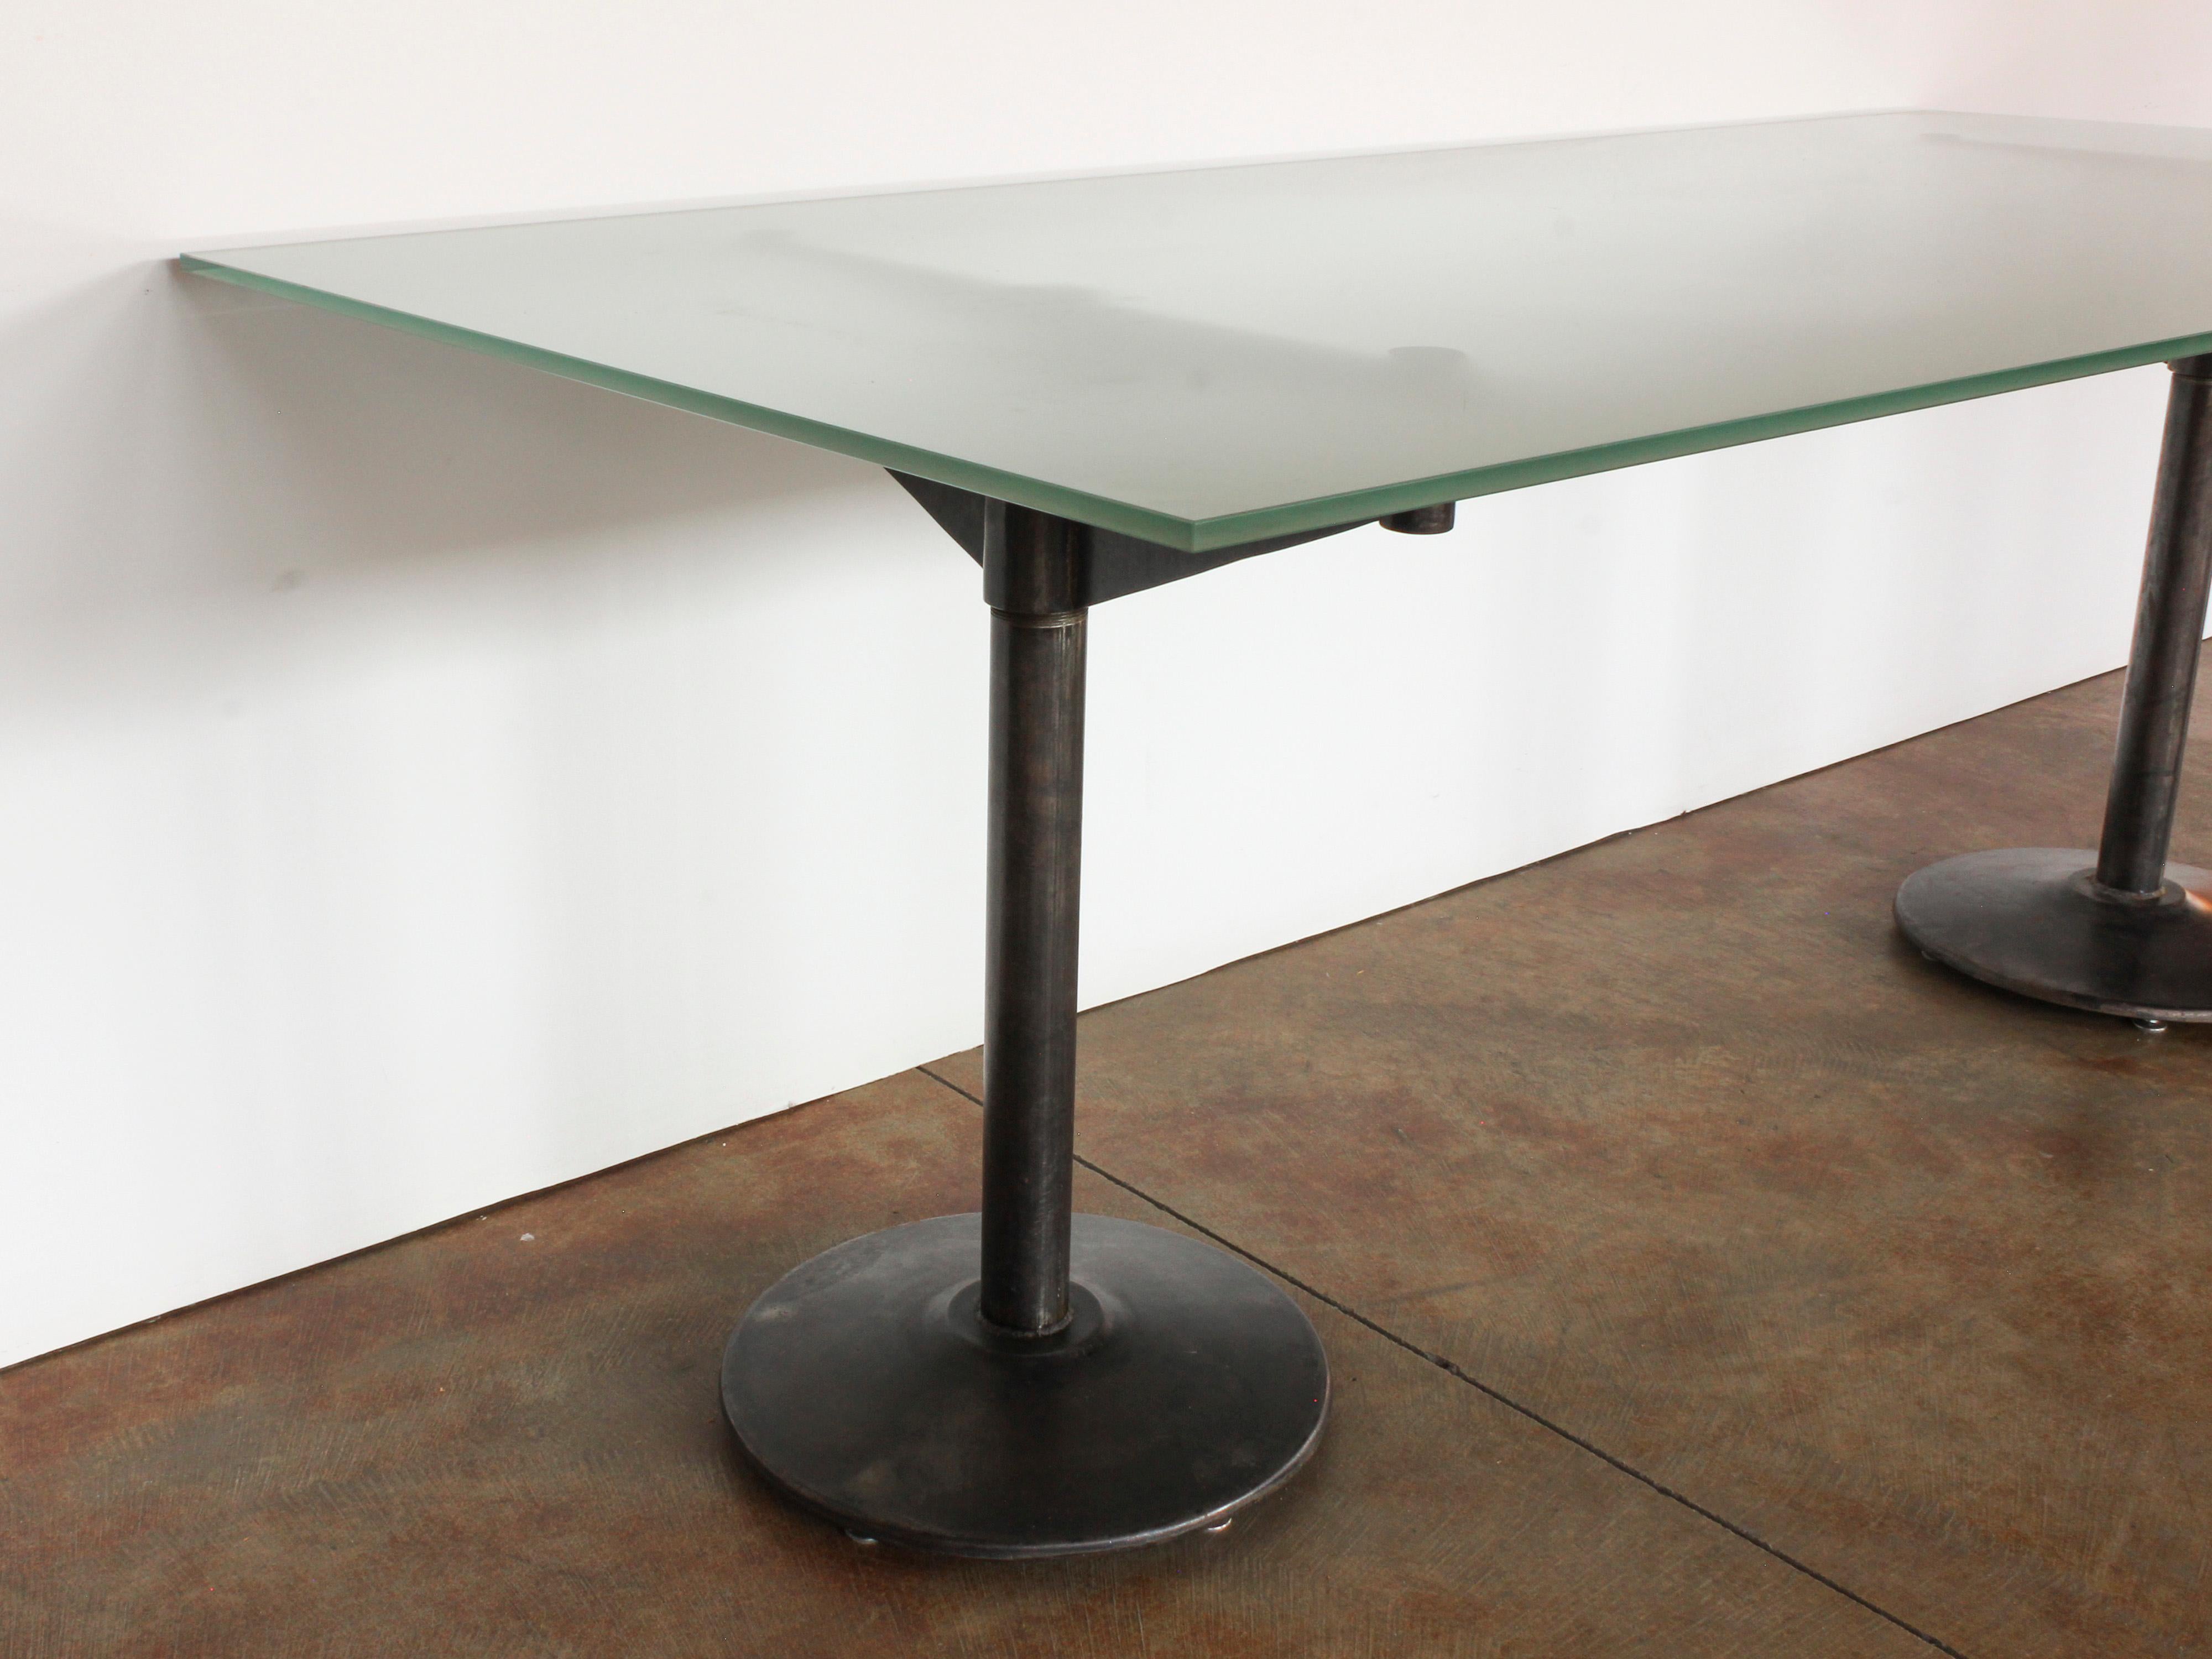 20th c. American Industrial Style Iron Pedestal Table with Frosted Glass Top For Sale 6